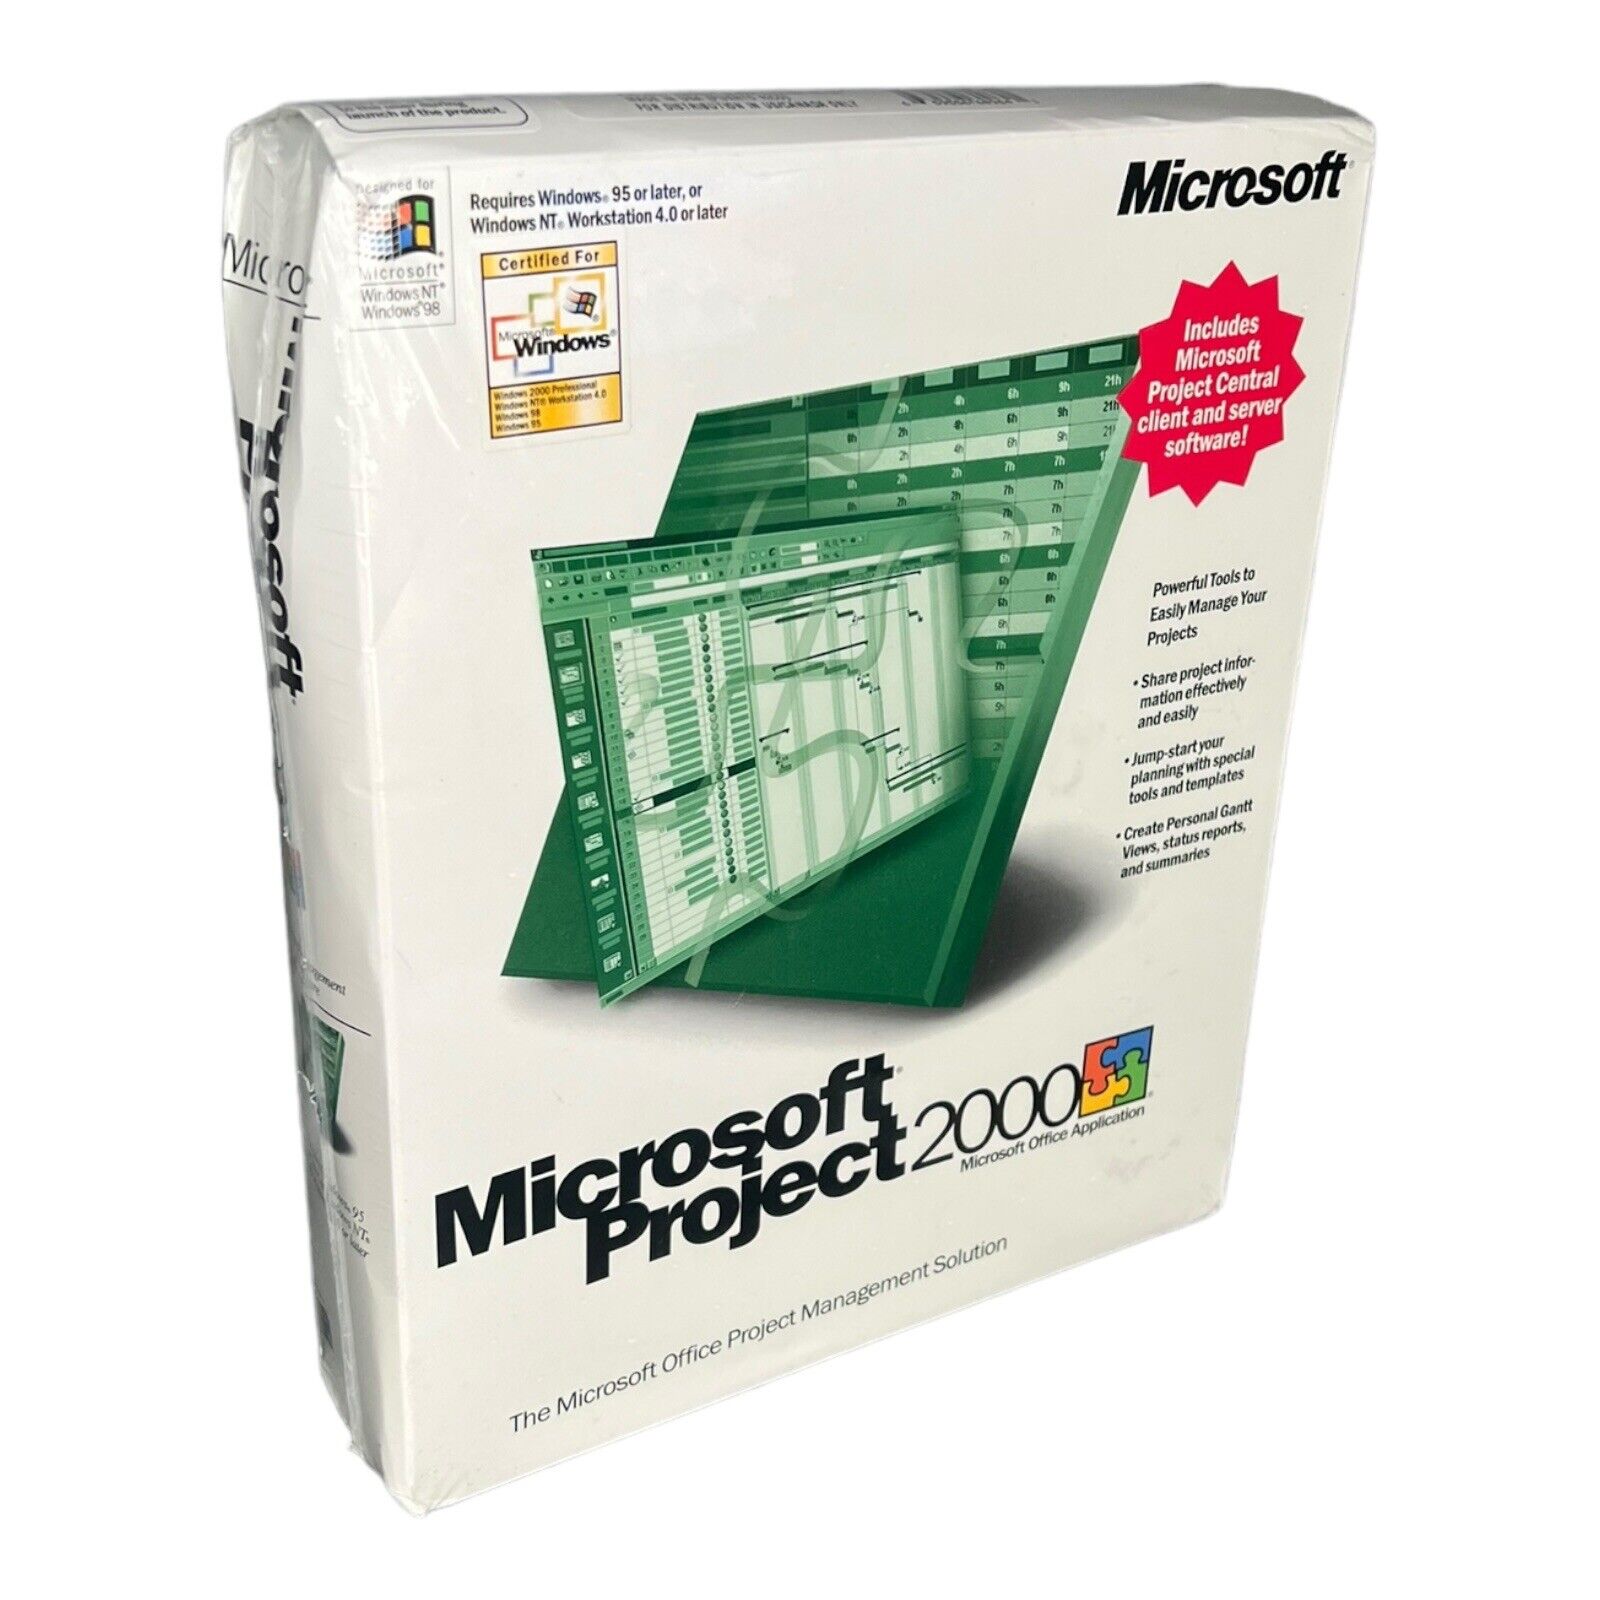 SEALED Microsoft Project 2000 w/ Project Central Client & Server Software NOS